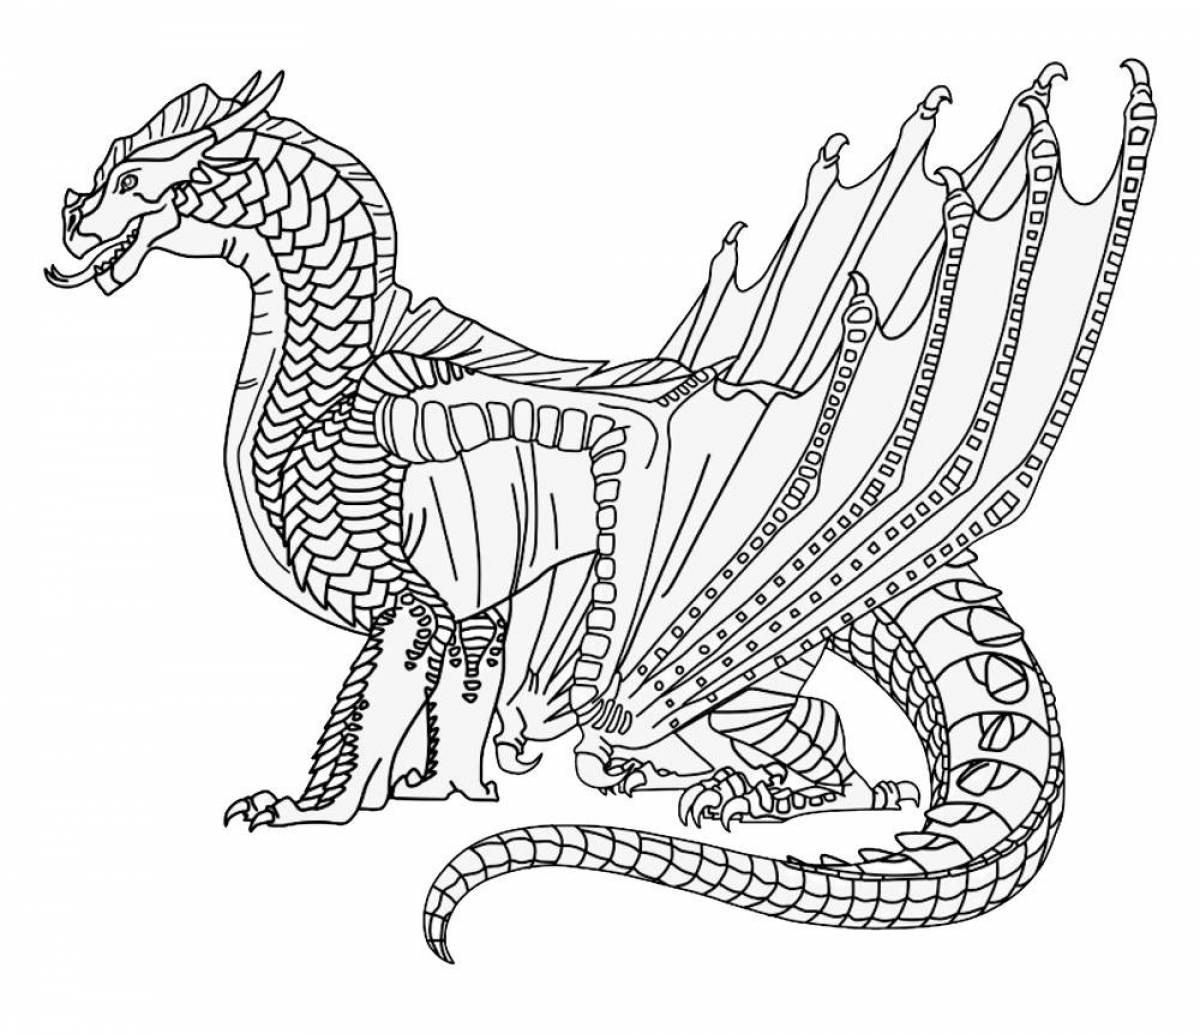 Incredible dragon coloring pages